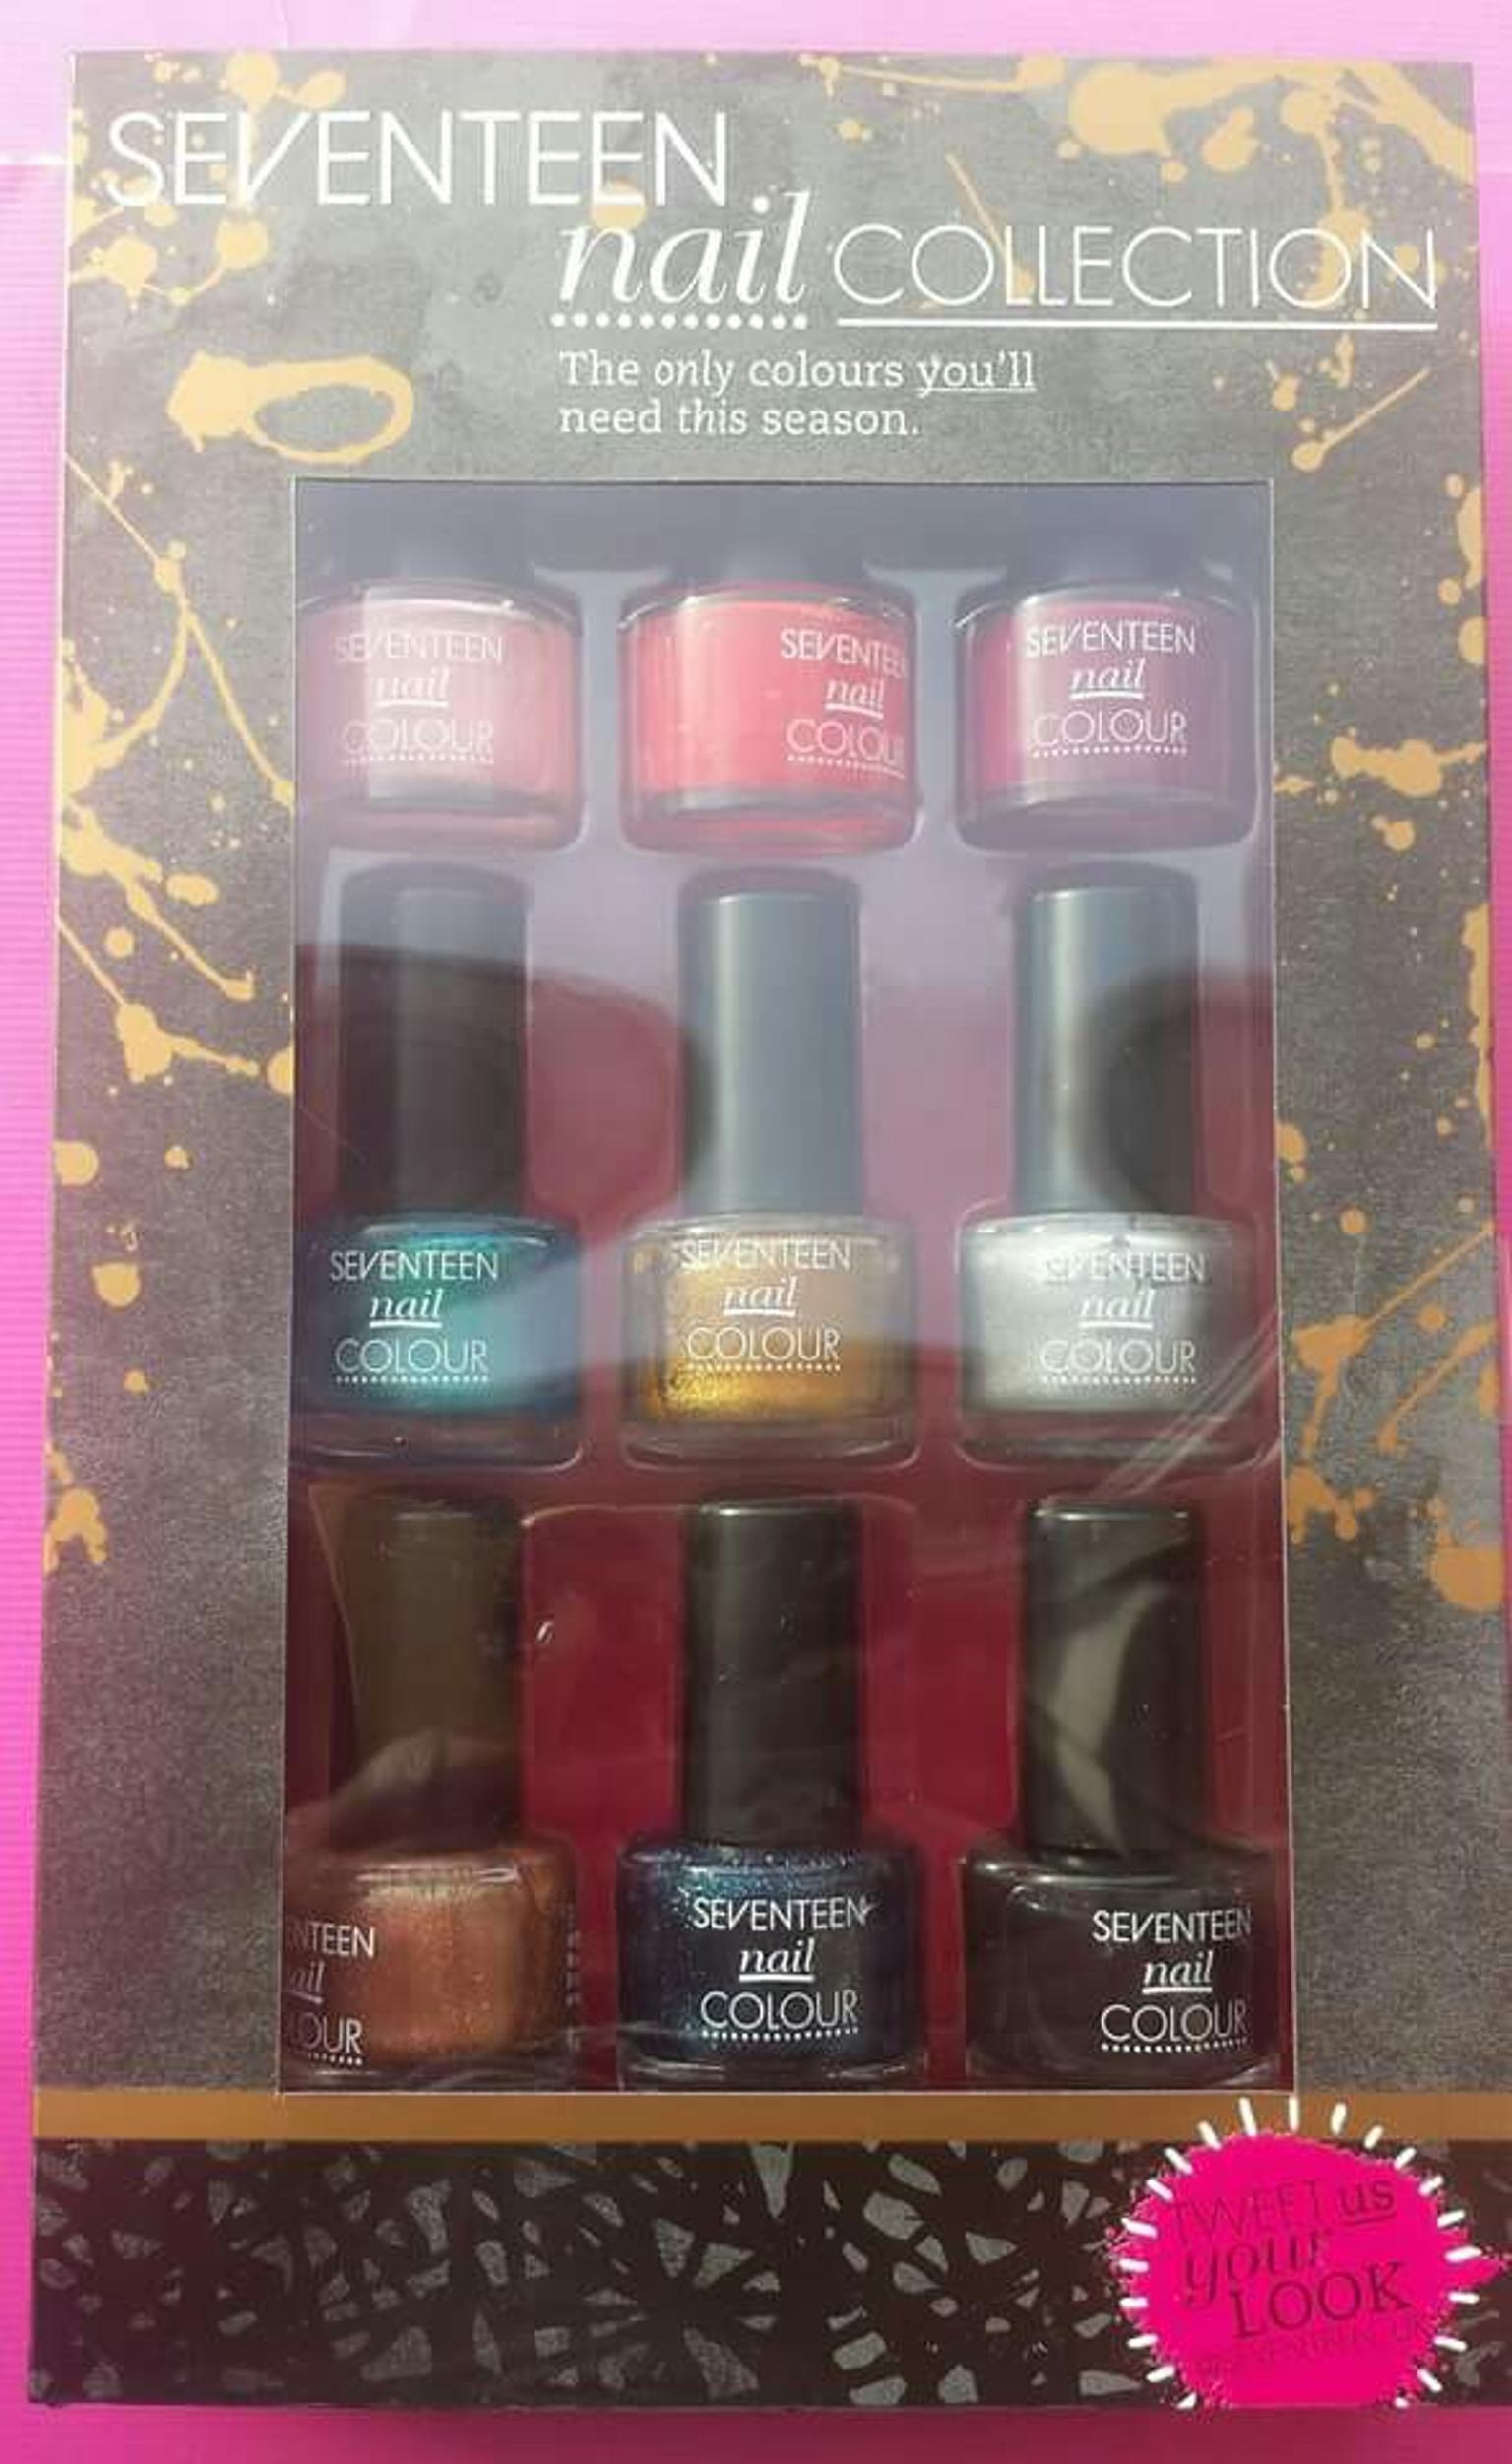 Boots 17 Nail Polish Gift Set In Ts12 Skelton In Cleveland For 6 25 For Sale Shpock